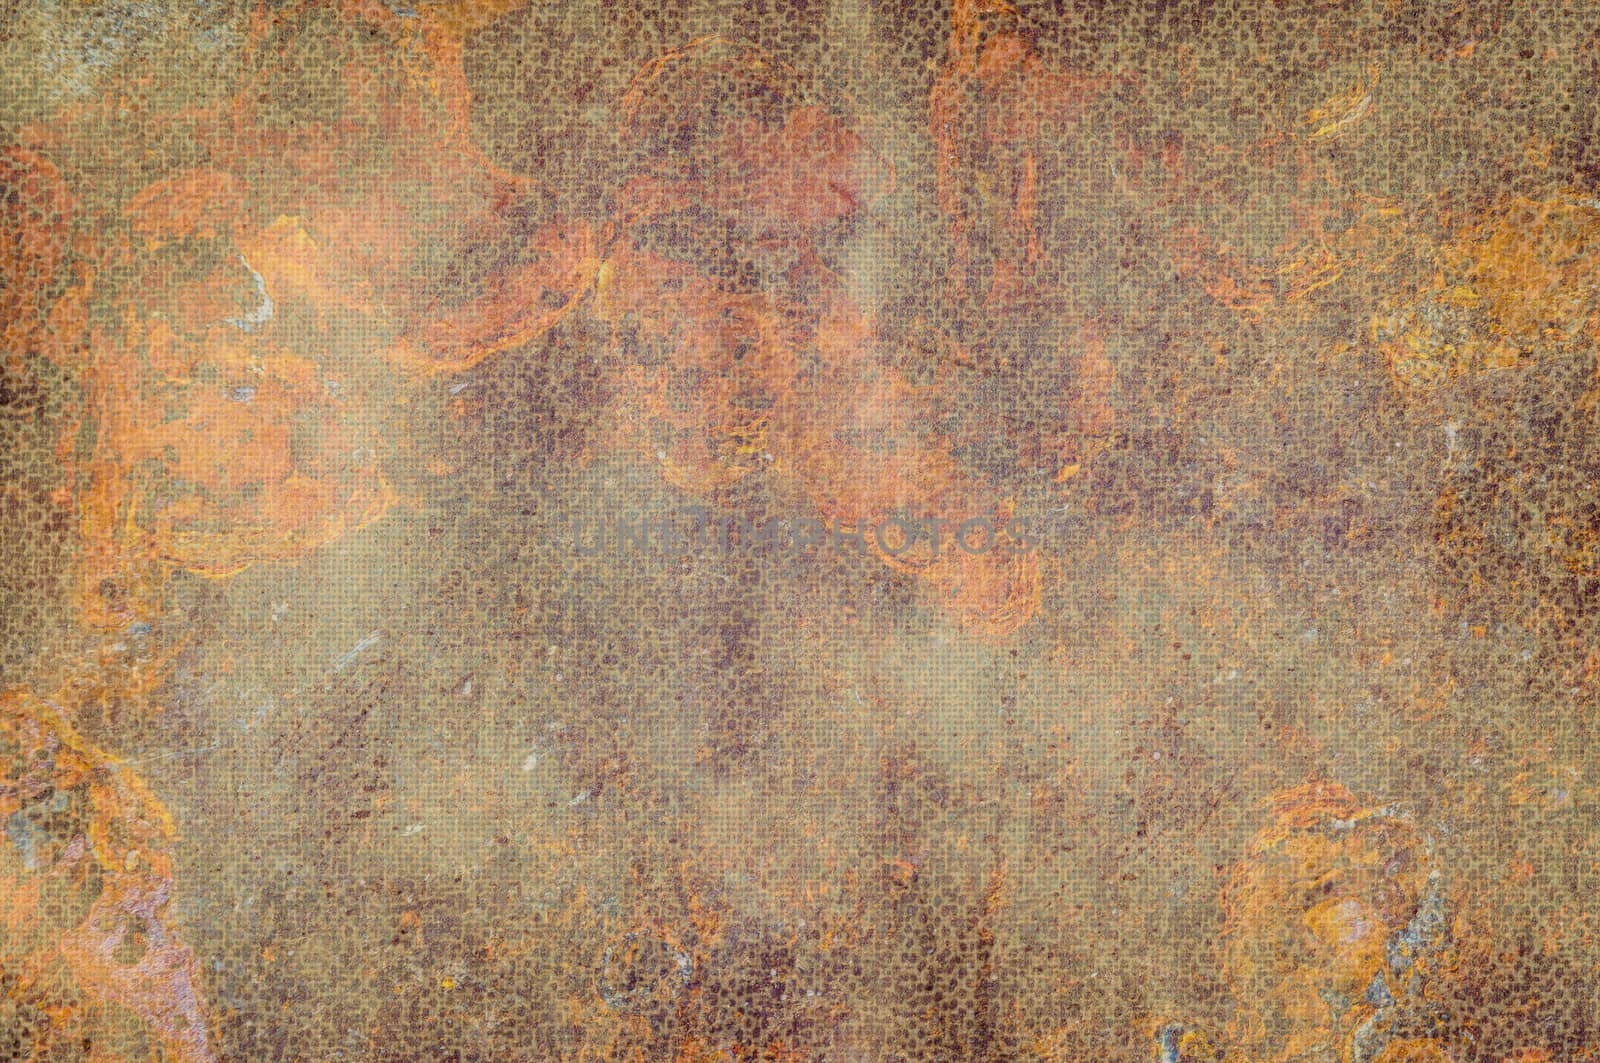 Abstract background with a red and orange texture of rust metal